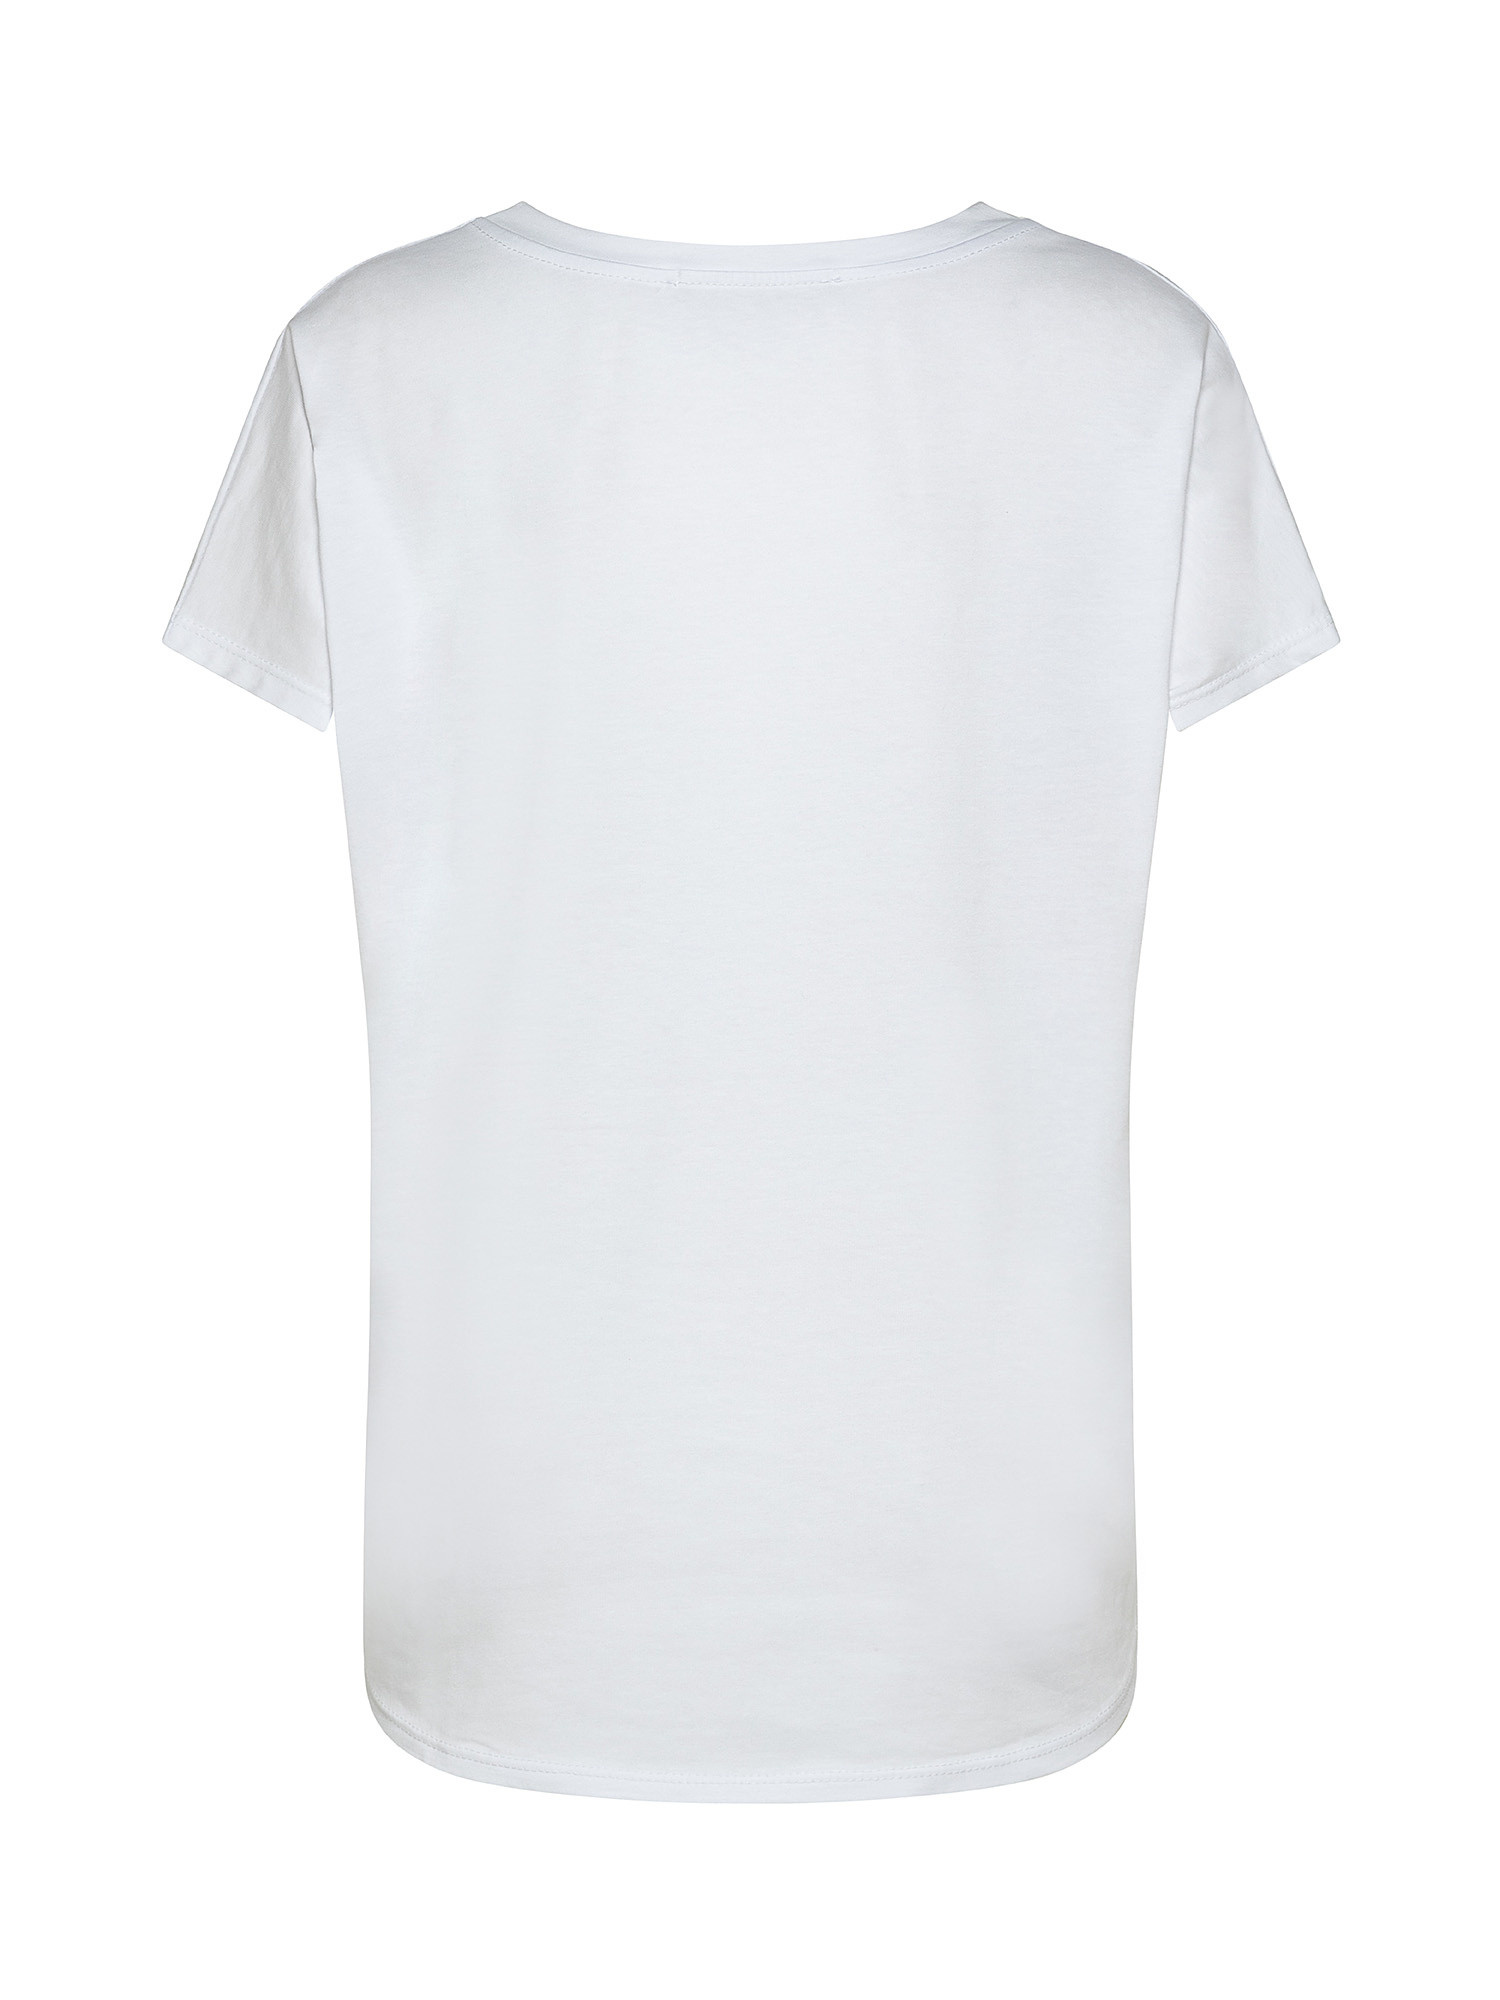 T-shirt con stampa etnica, Bianco, large image number 1